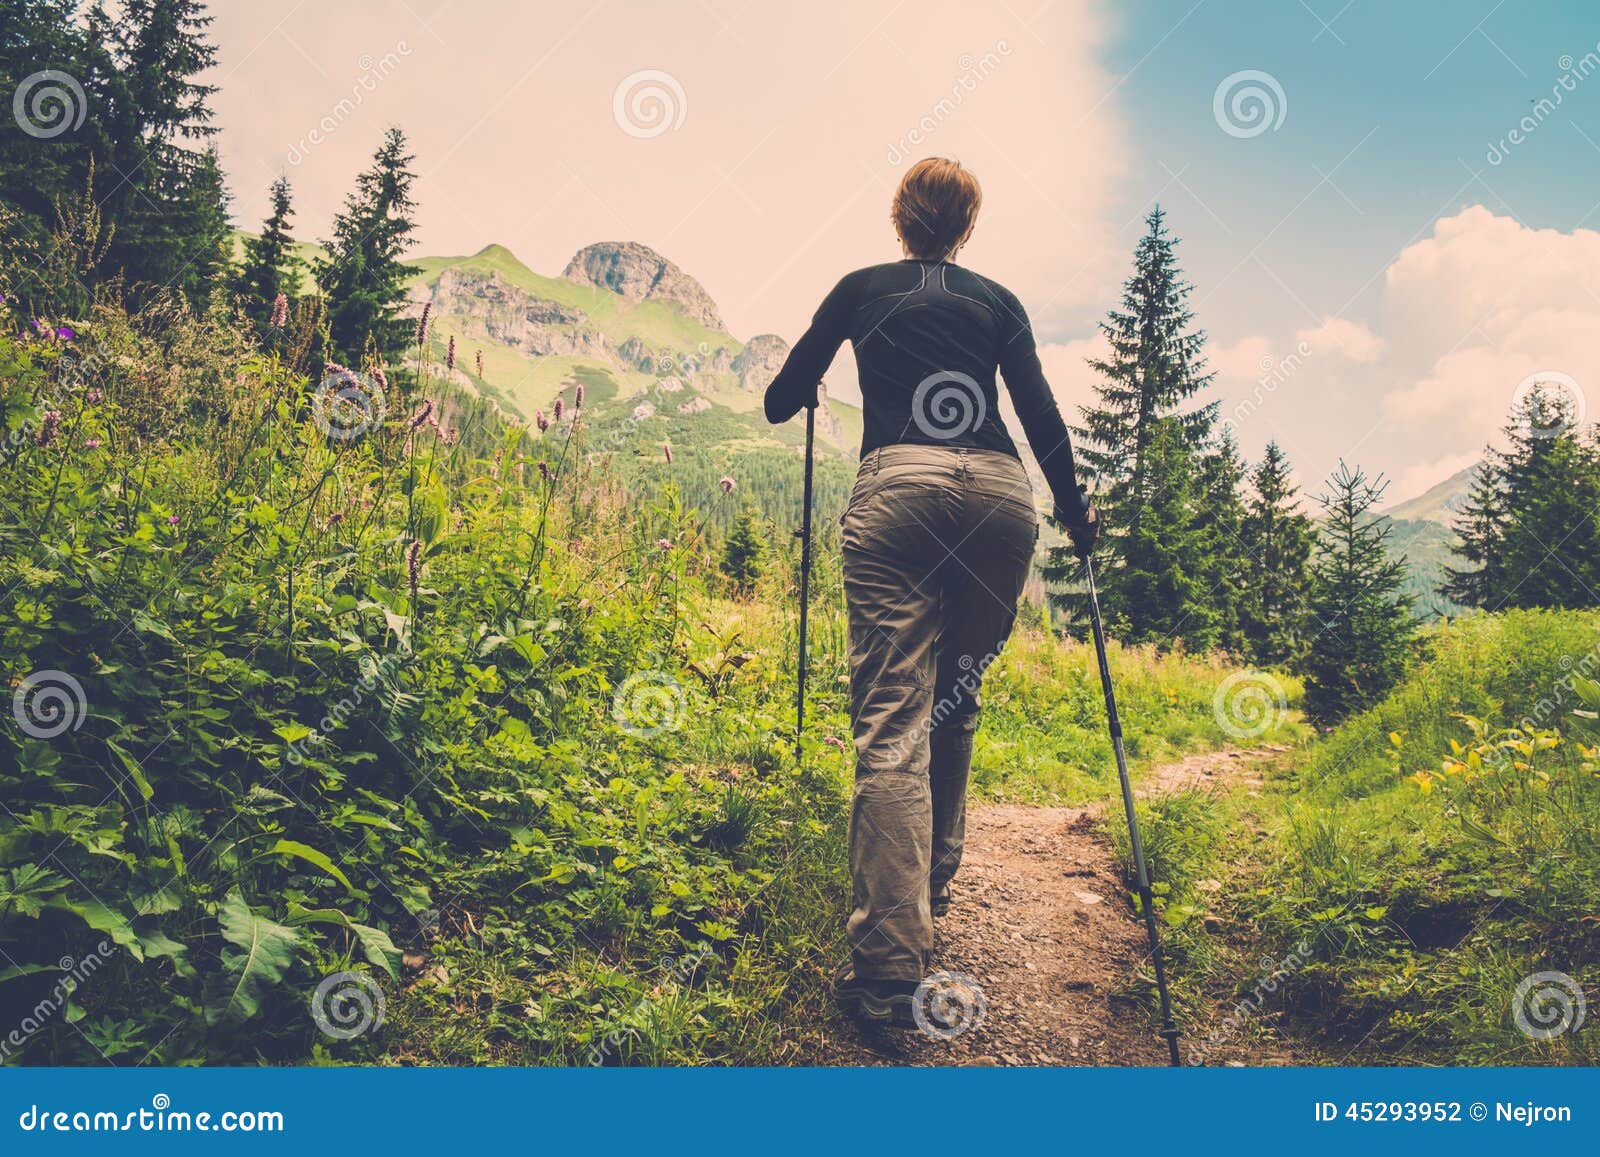 woman hiking in mountain forest